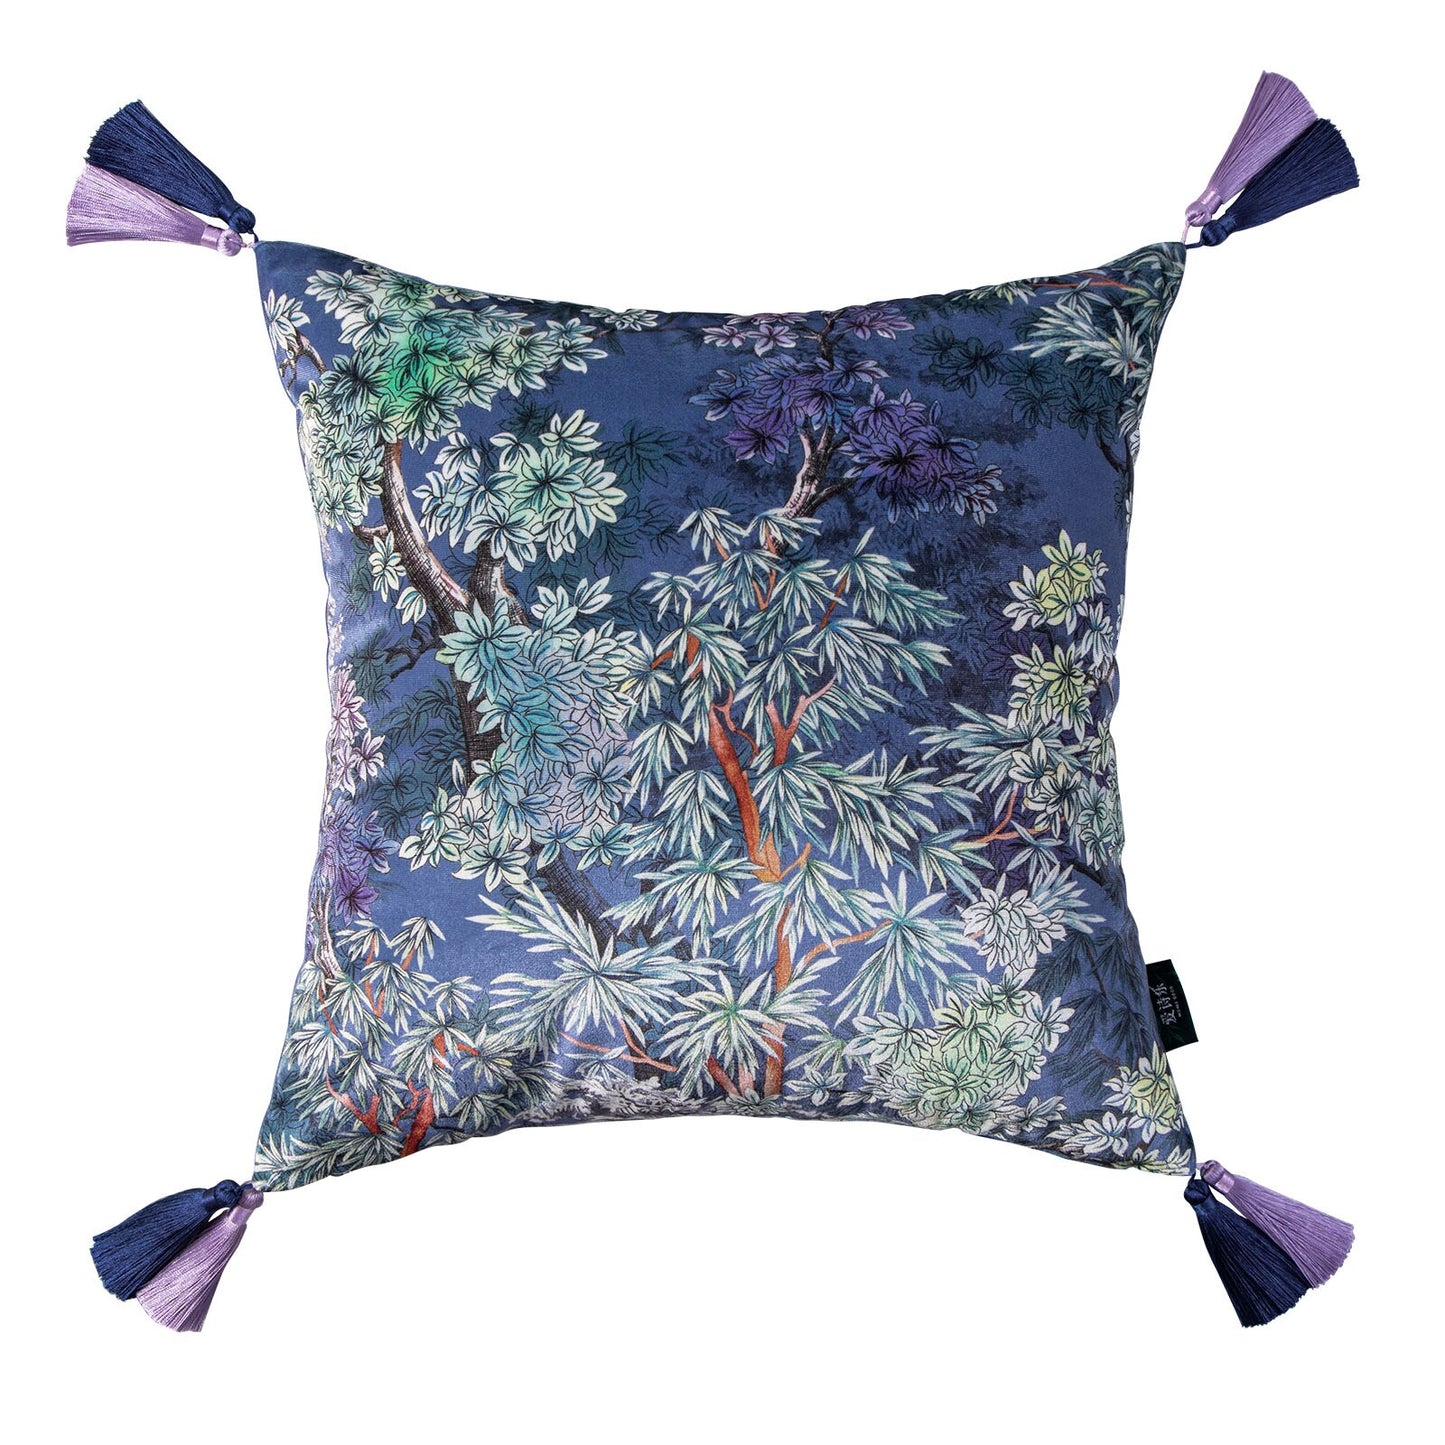 Night Royal Garden Floral Bloom Throw Pillow Case with Tassels